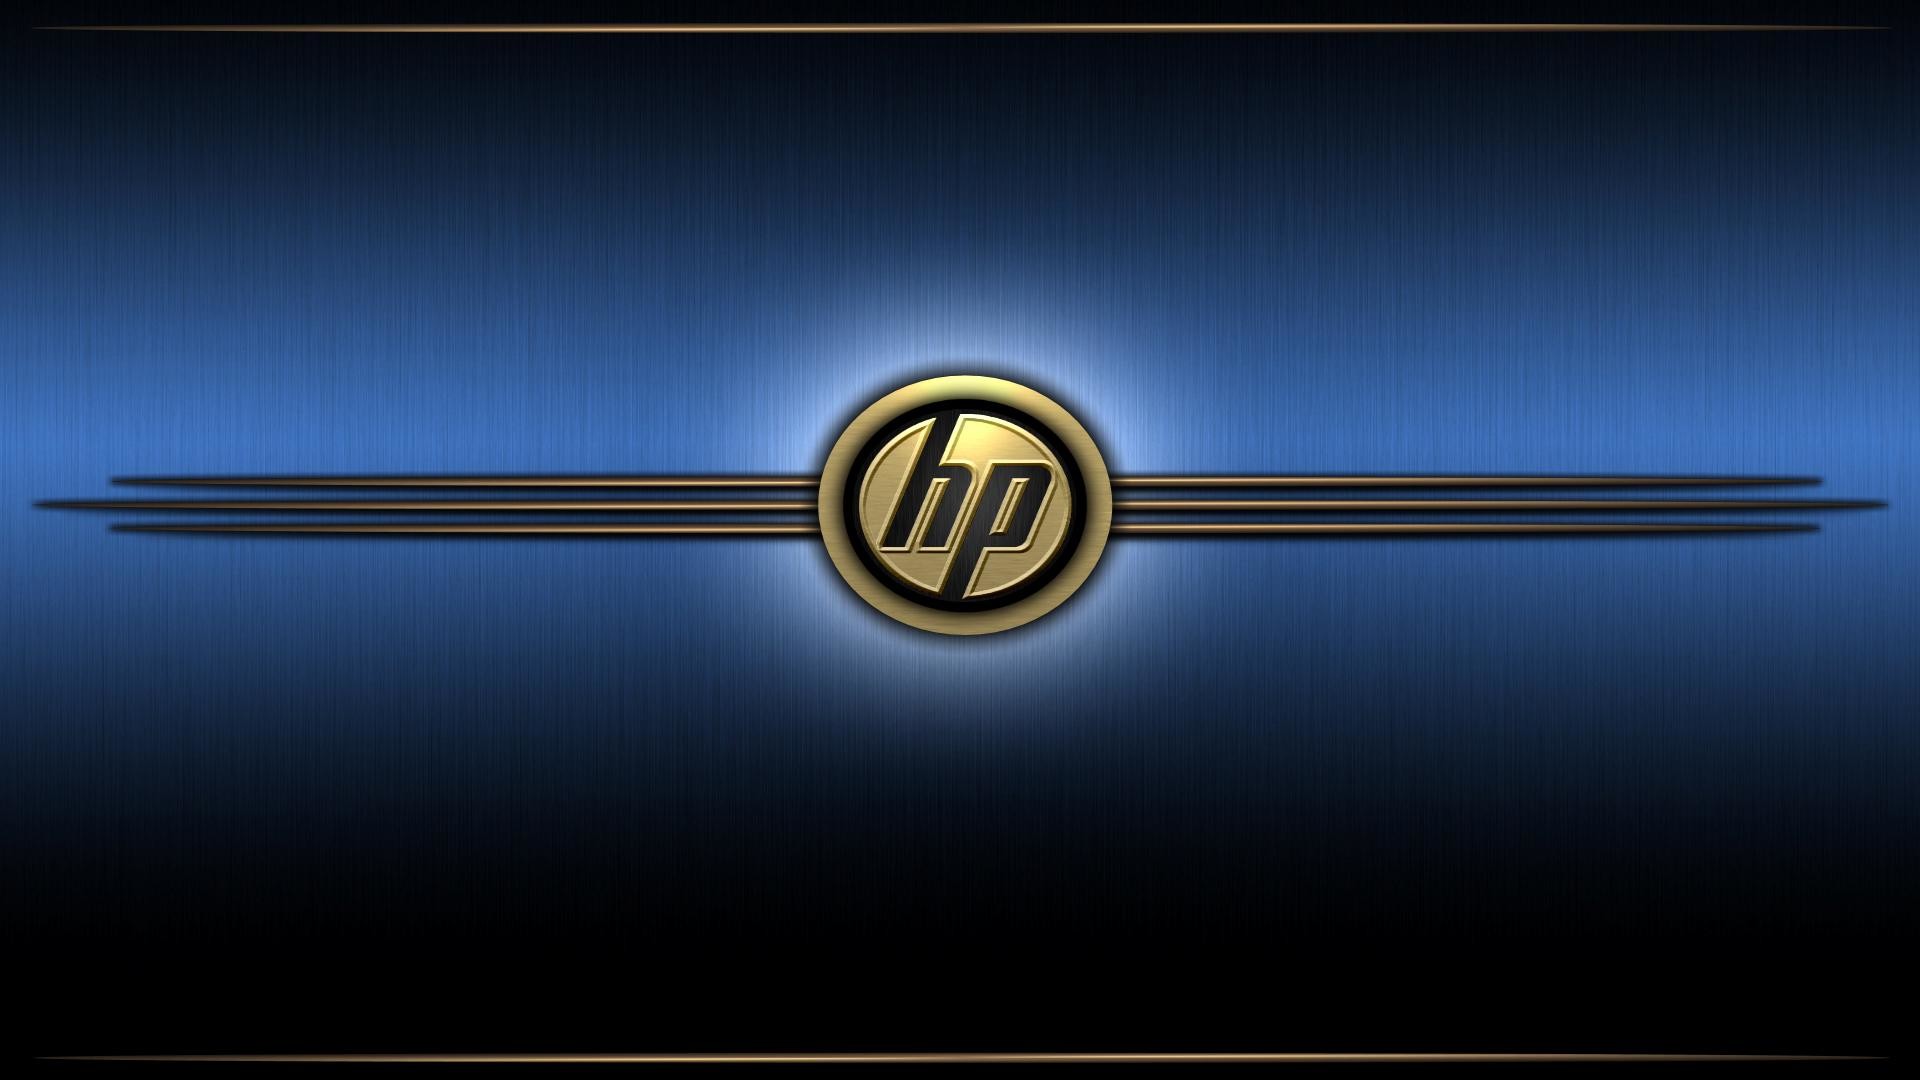 30 HewlettPackard HD Wallpapers and Backgrounds